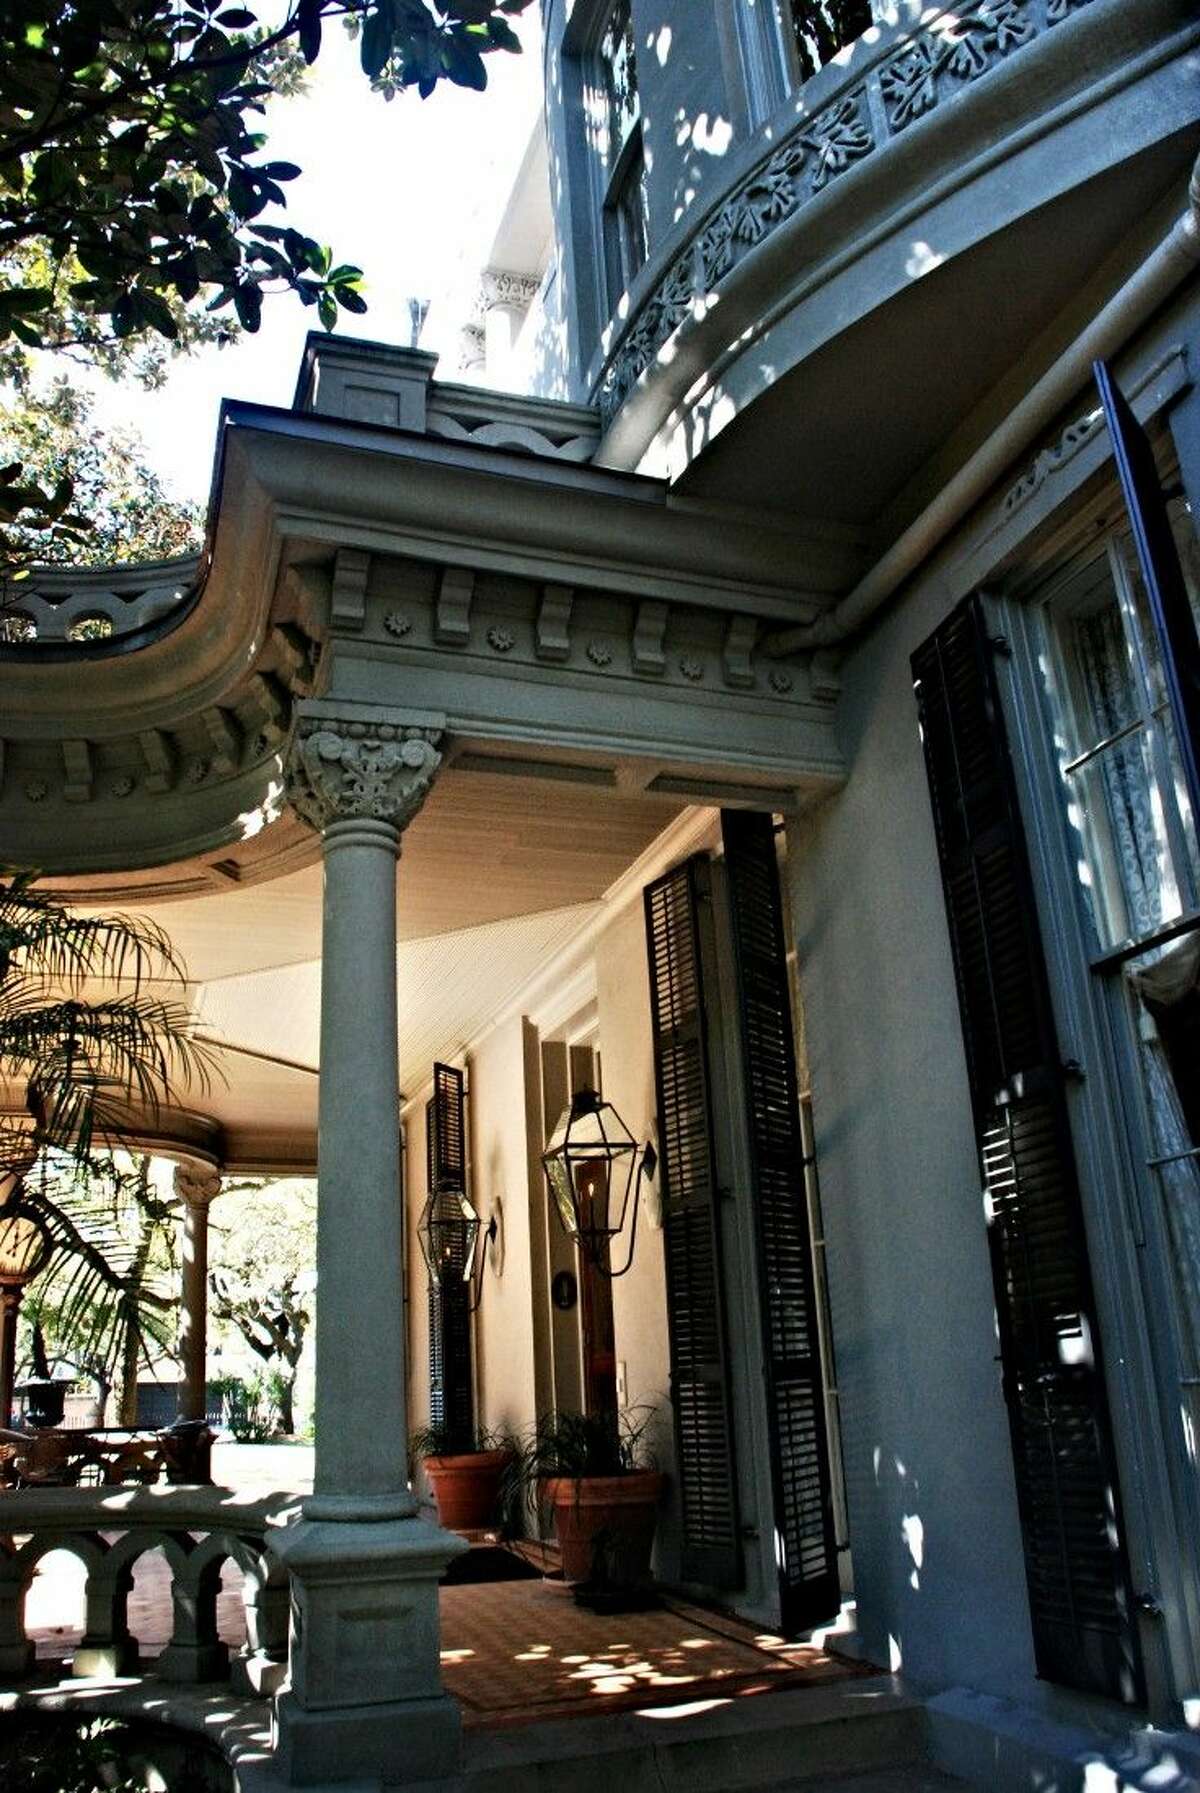 Galveston Historical Foundation opens the doors to Galveston’s architectural history through public tours of privately owned homes for the first two weekends each May.